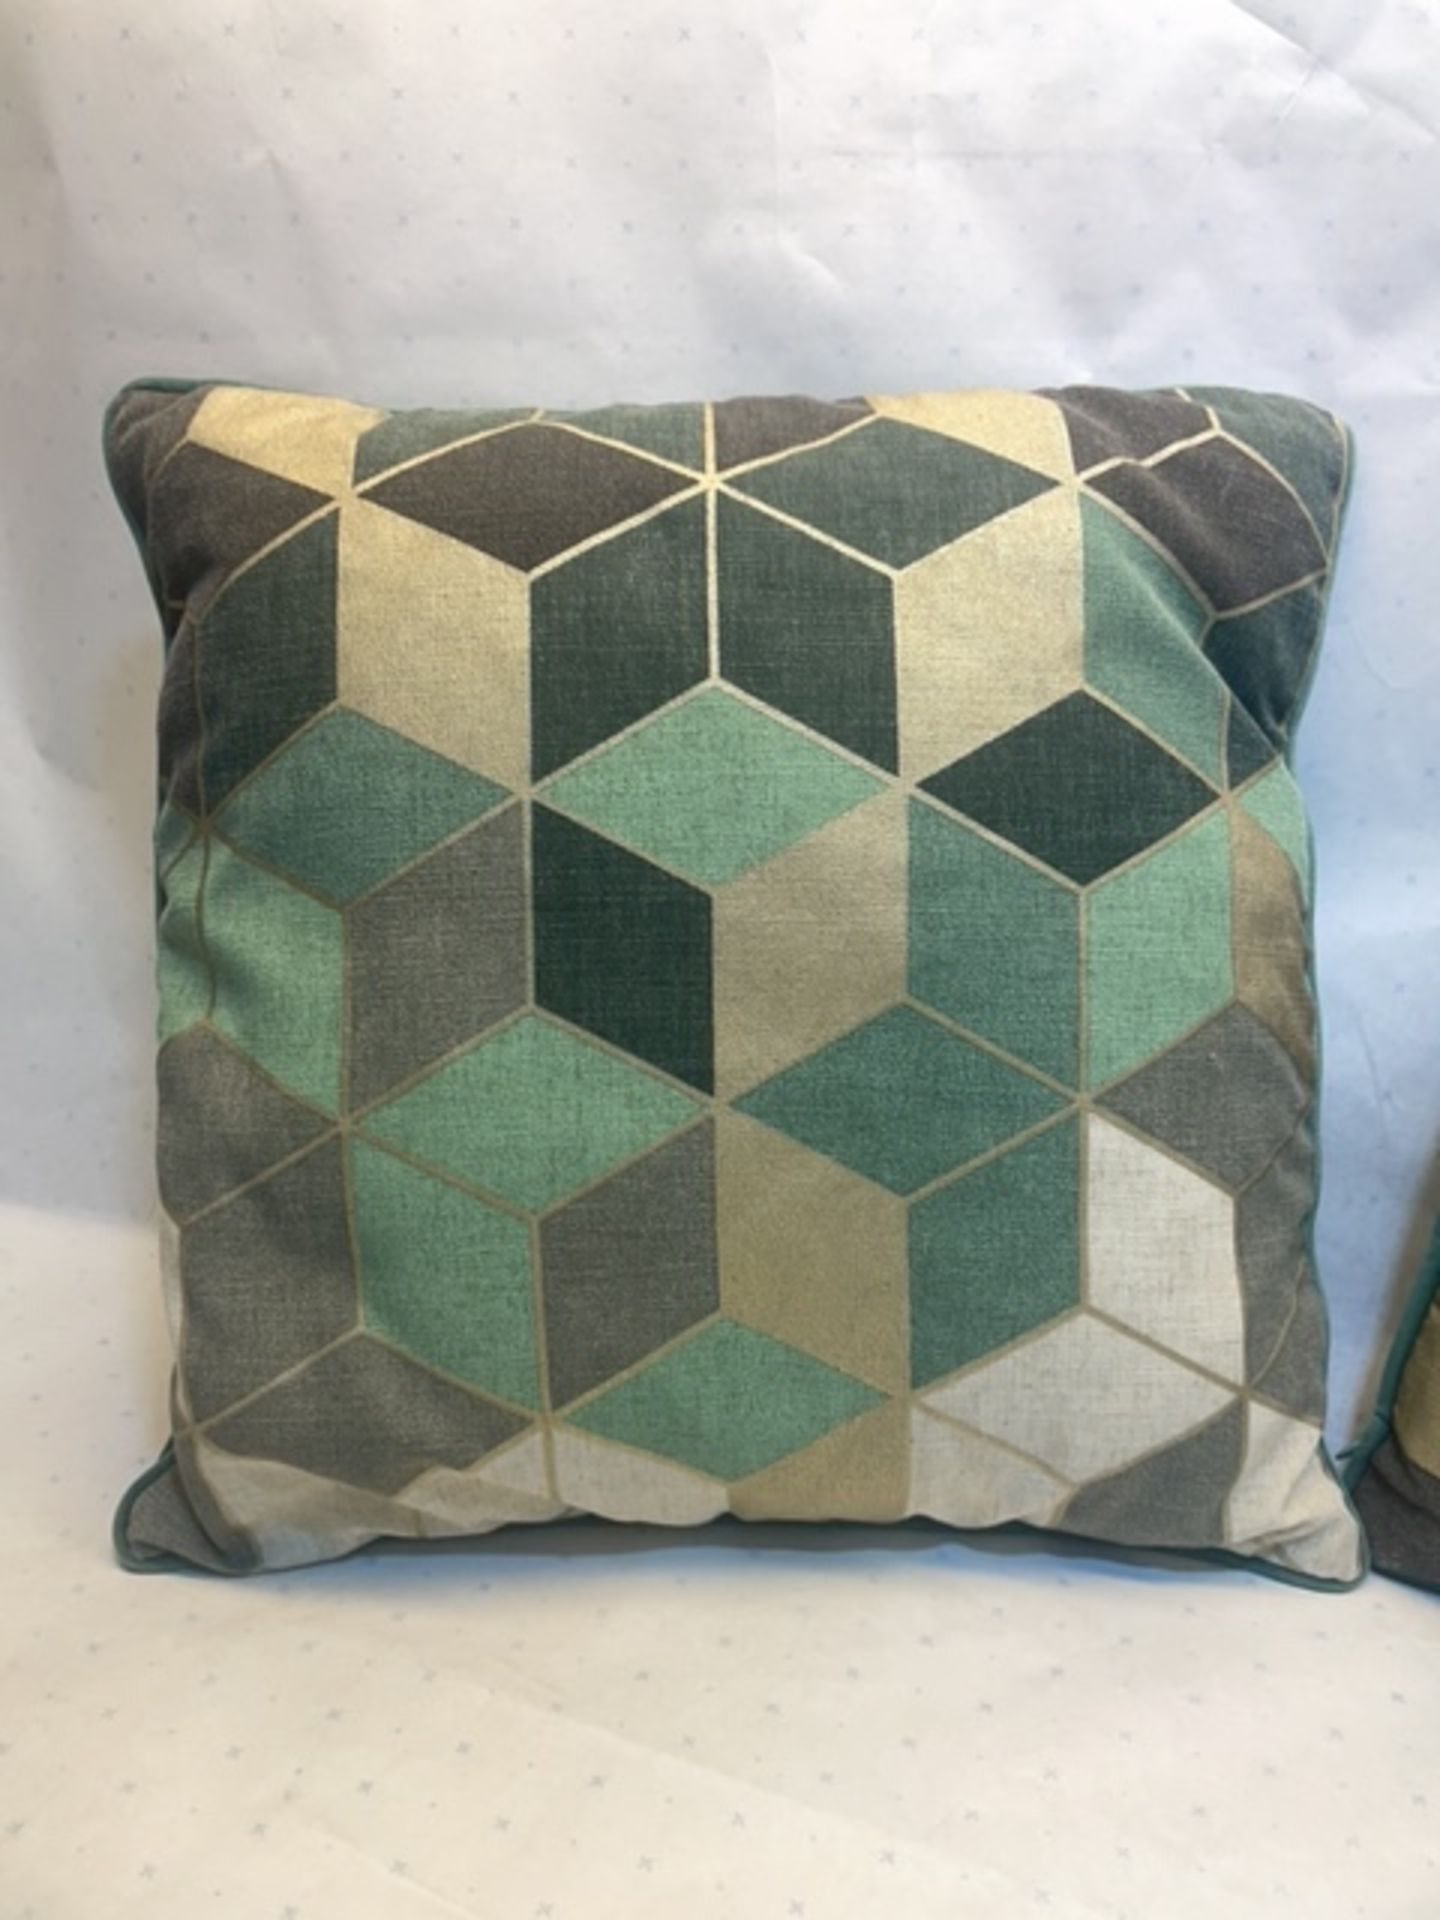 4 x Green Cushions with Geometric Pattern on Front - Image 5 of 6